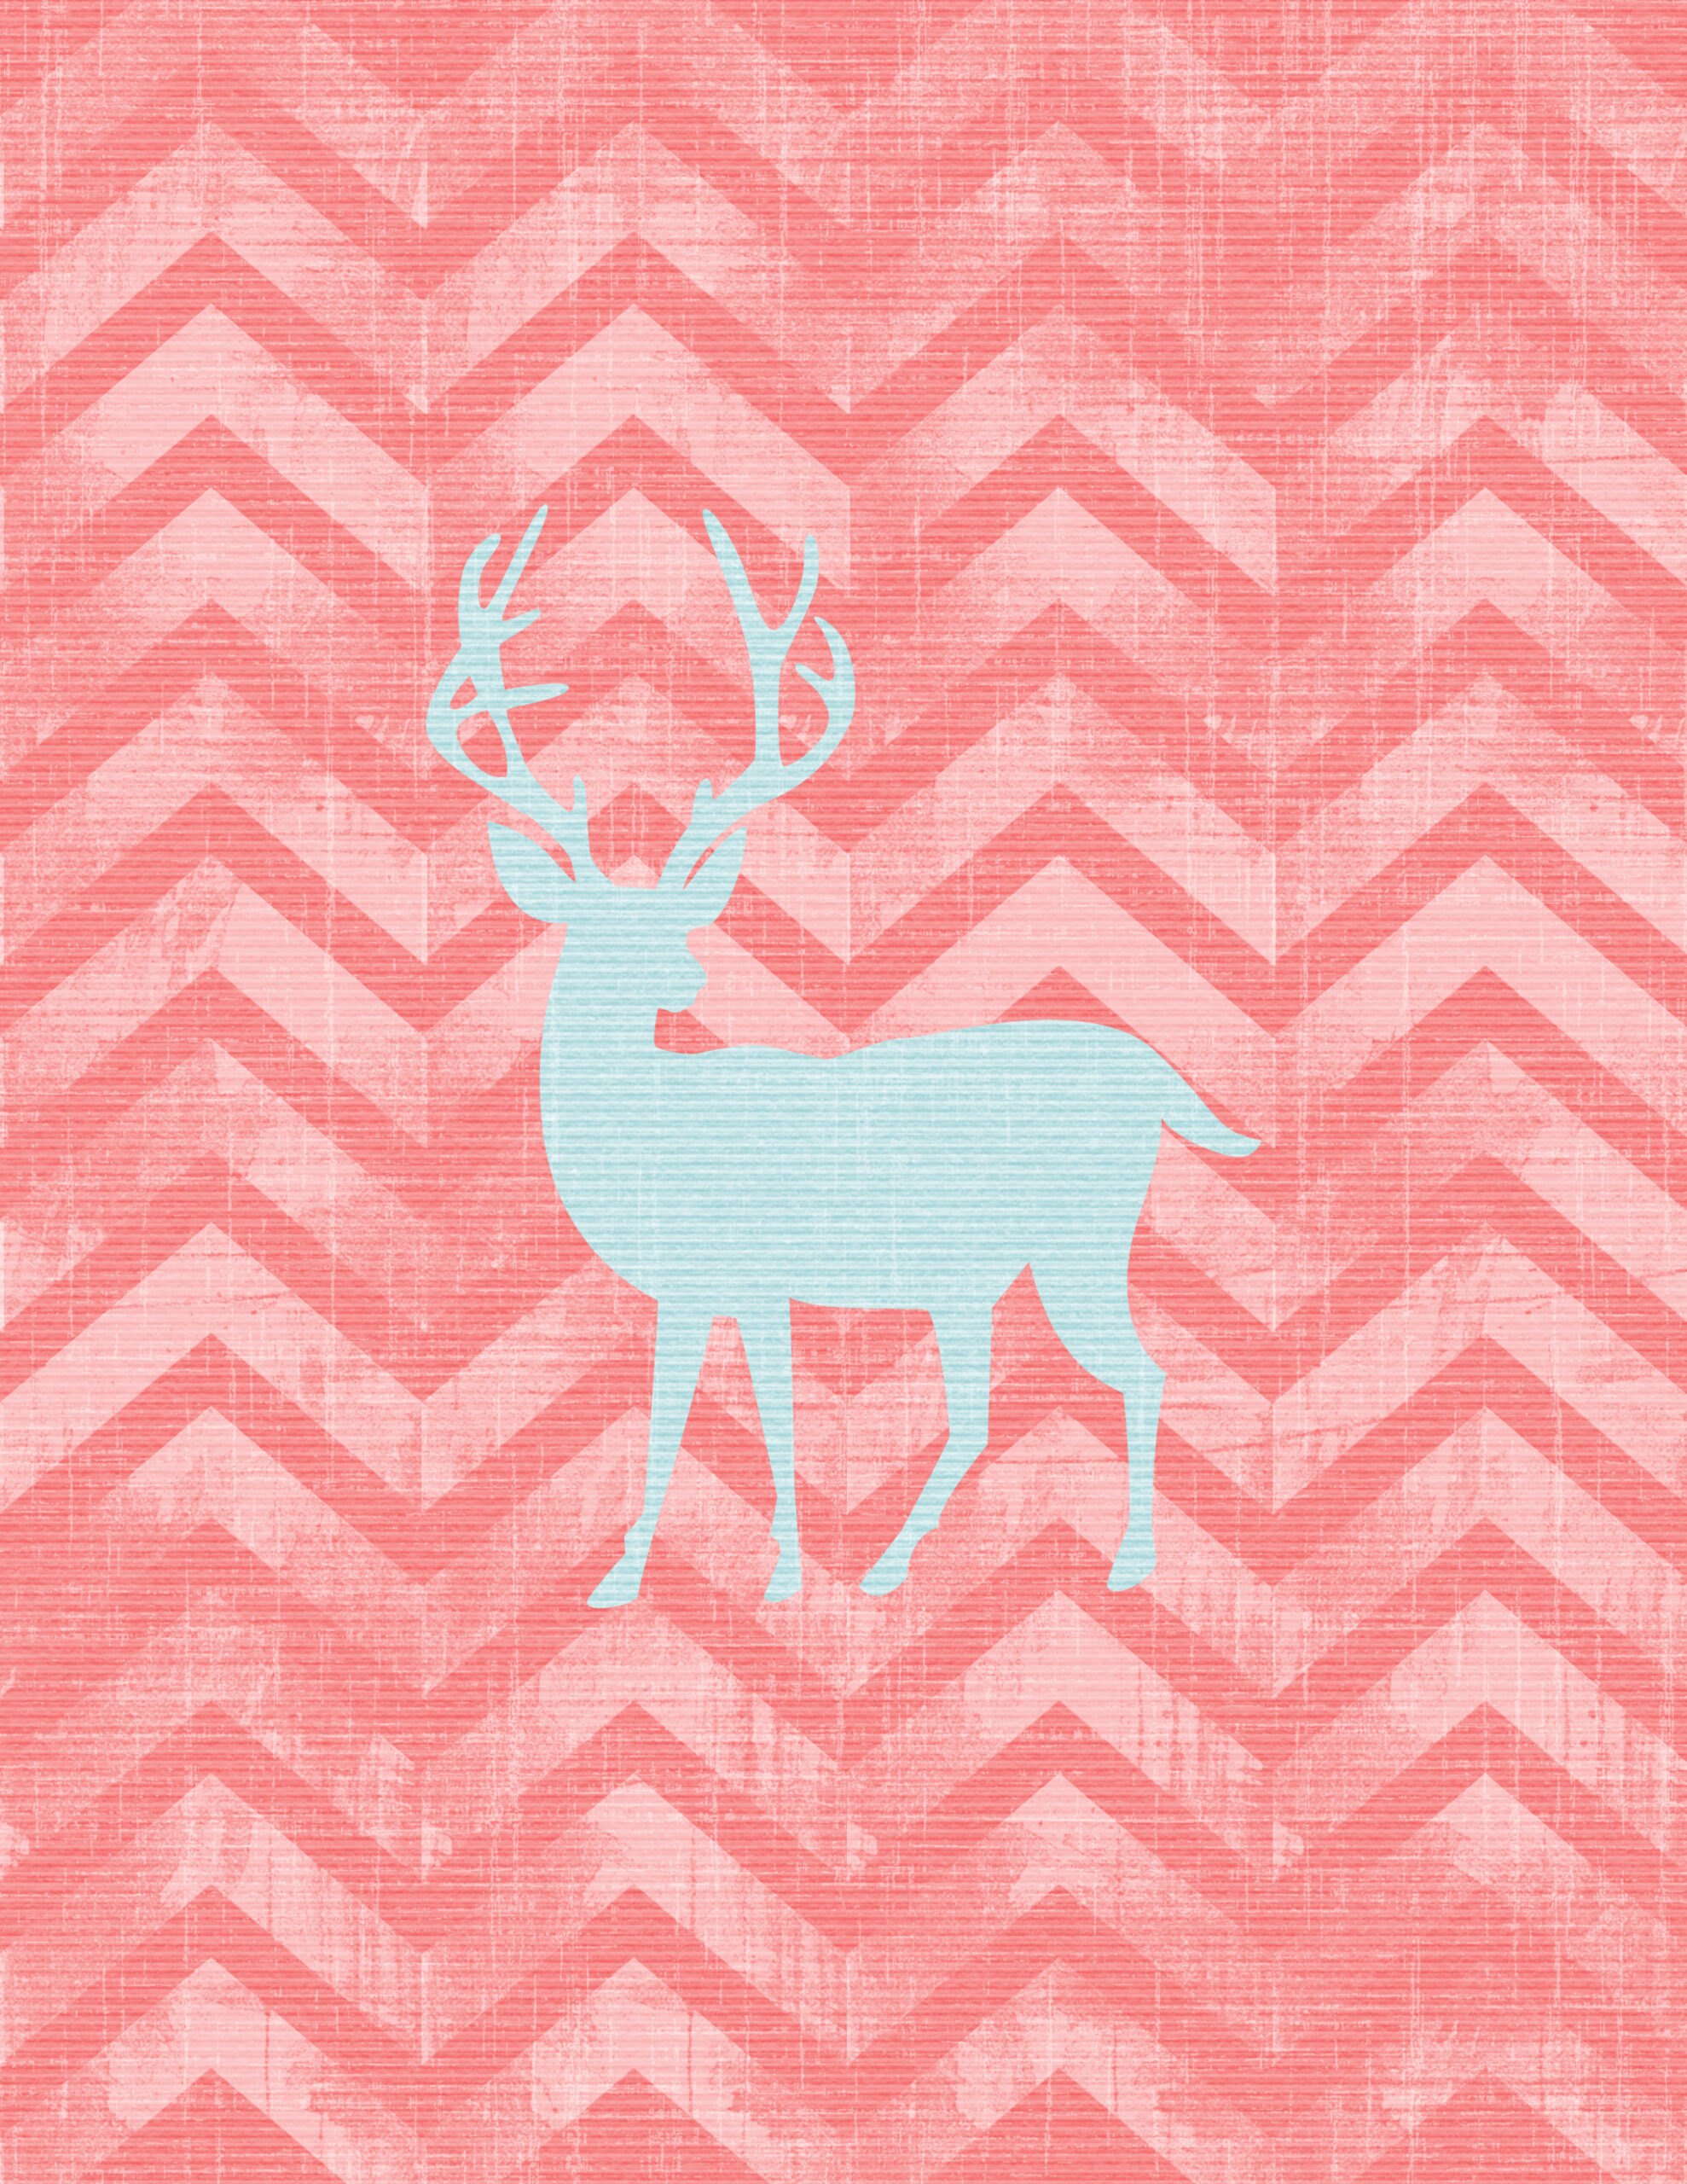 Free Printable Deer Wall Art Fabulous Friday The Graffical Muse